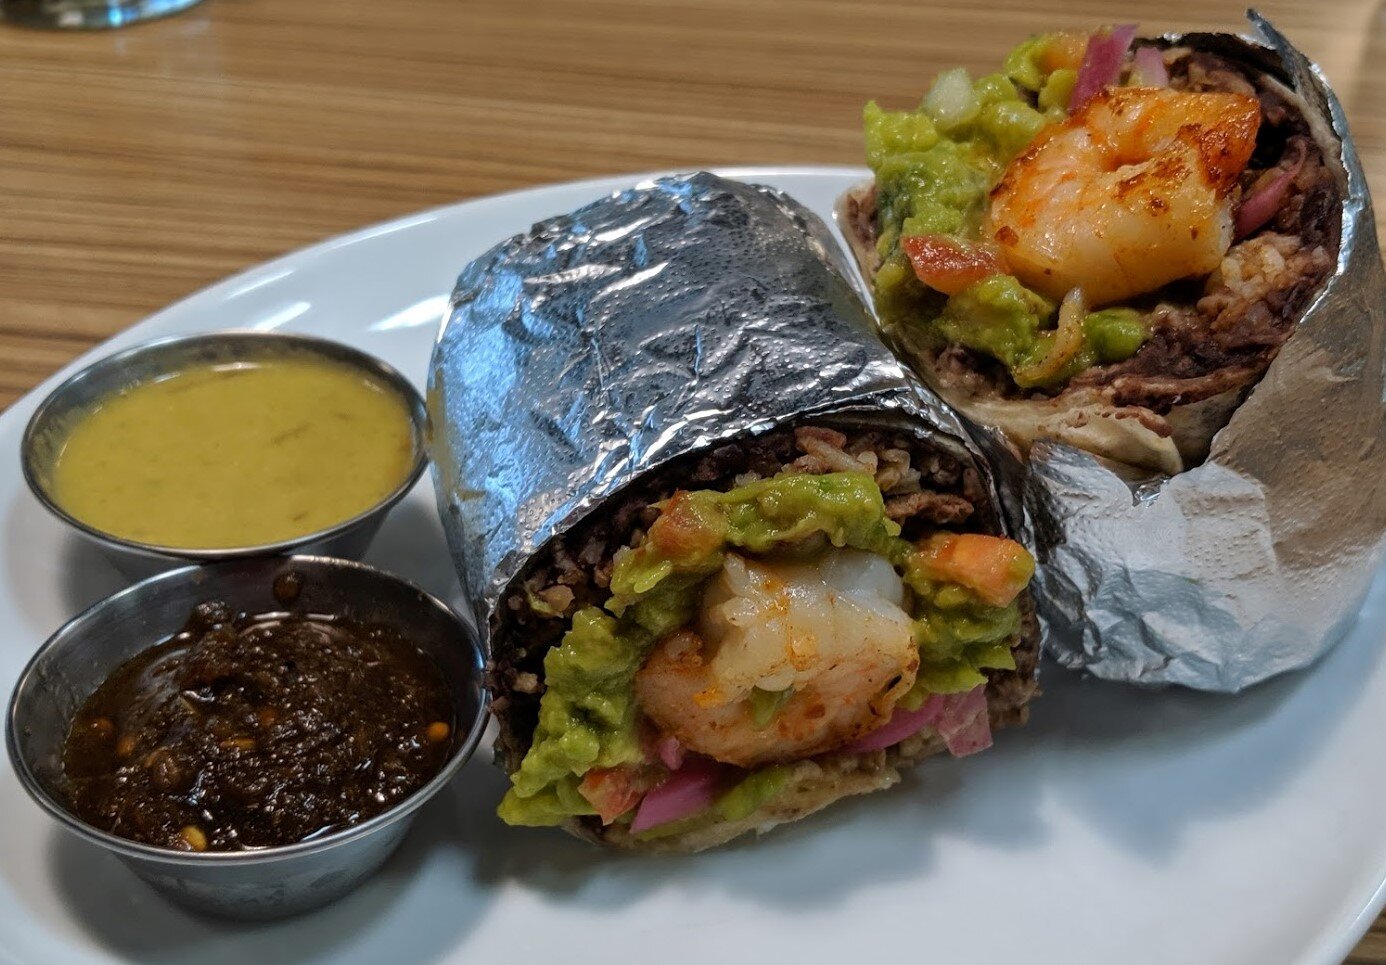 THE BEST BURRITOS IN THE ROGUE VALLEY